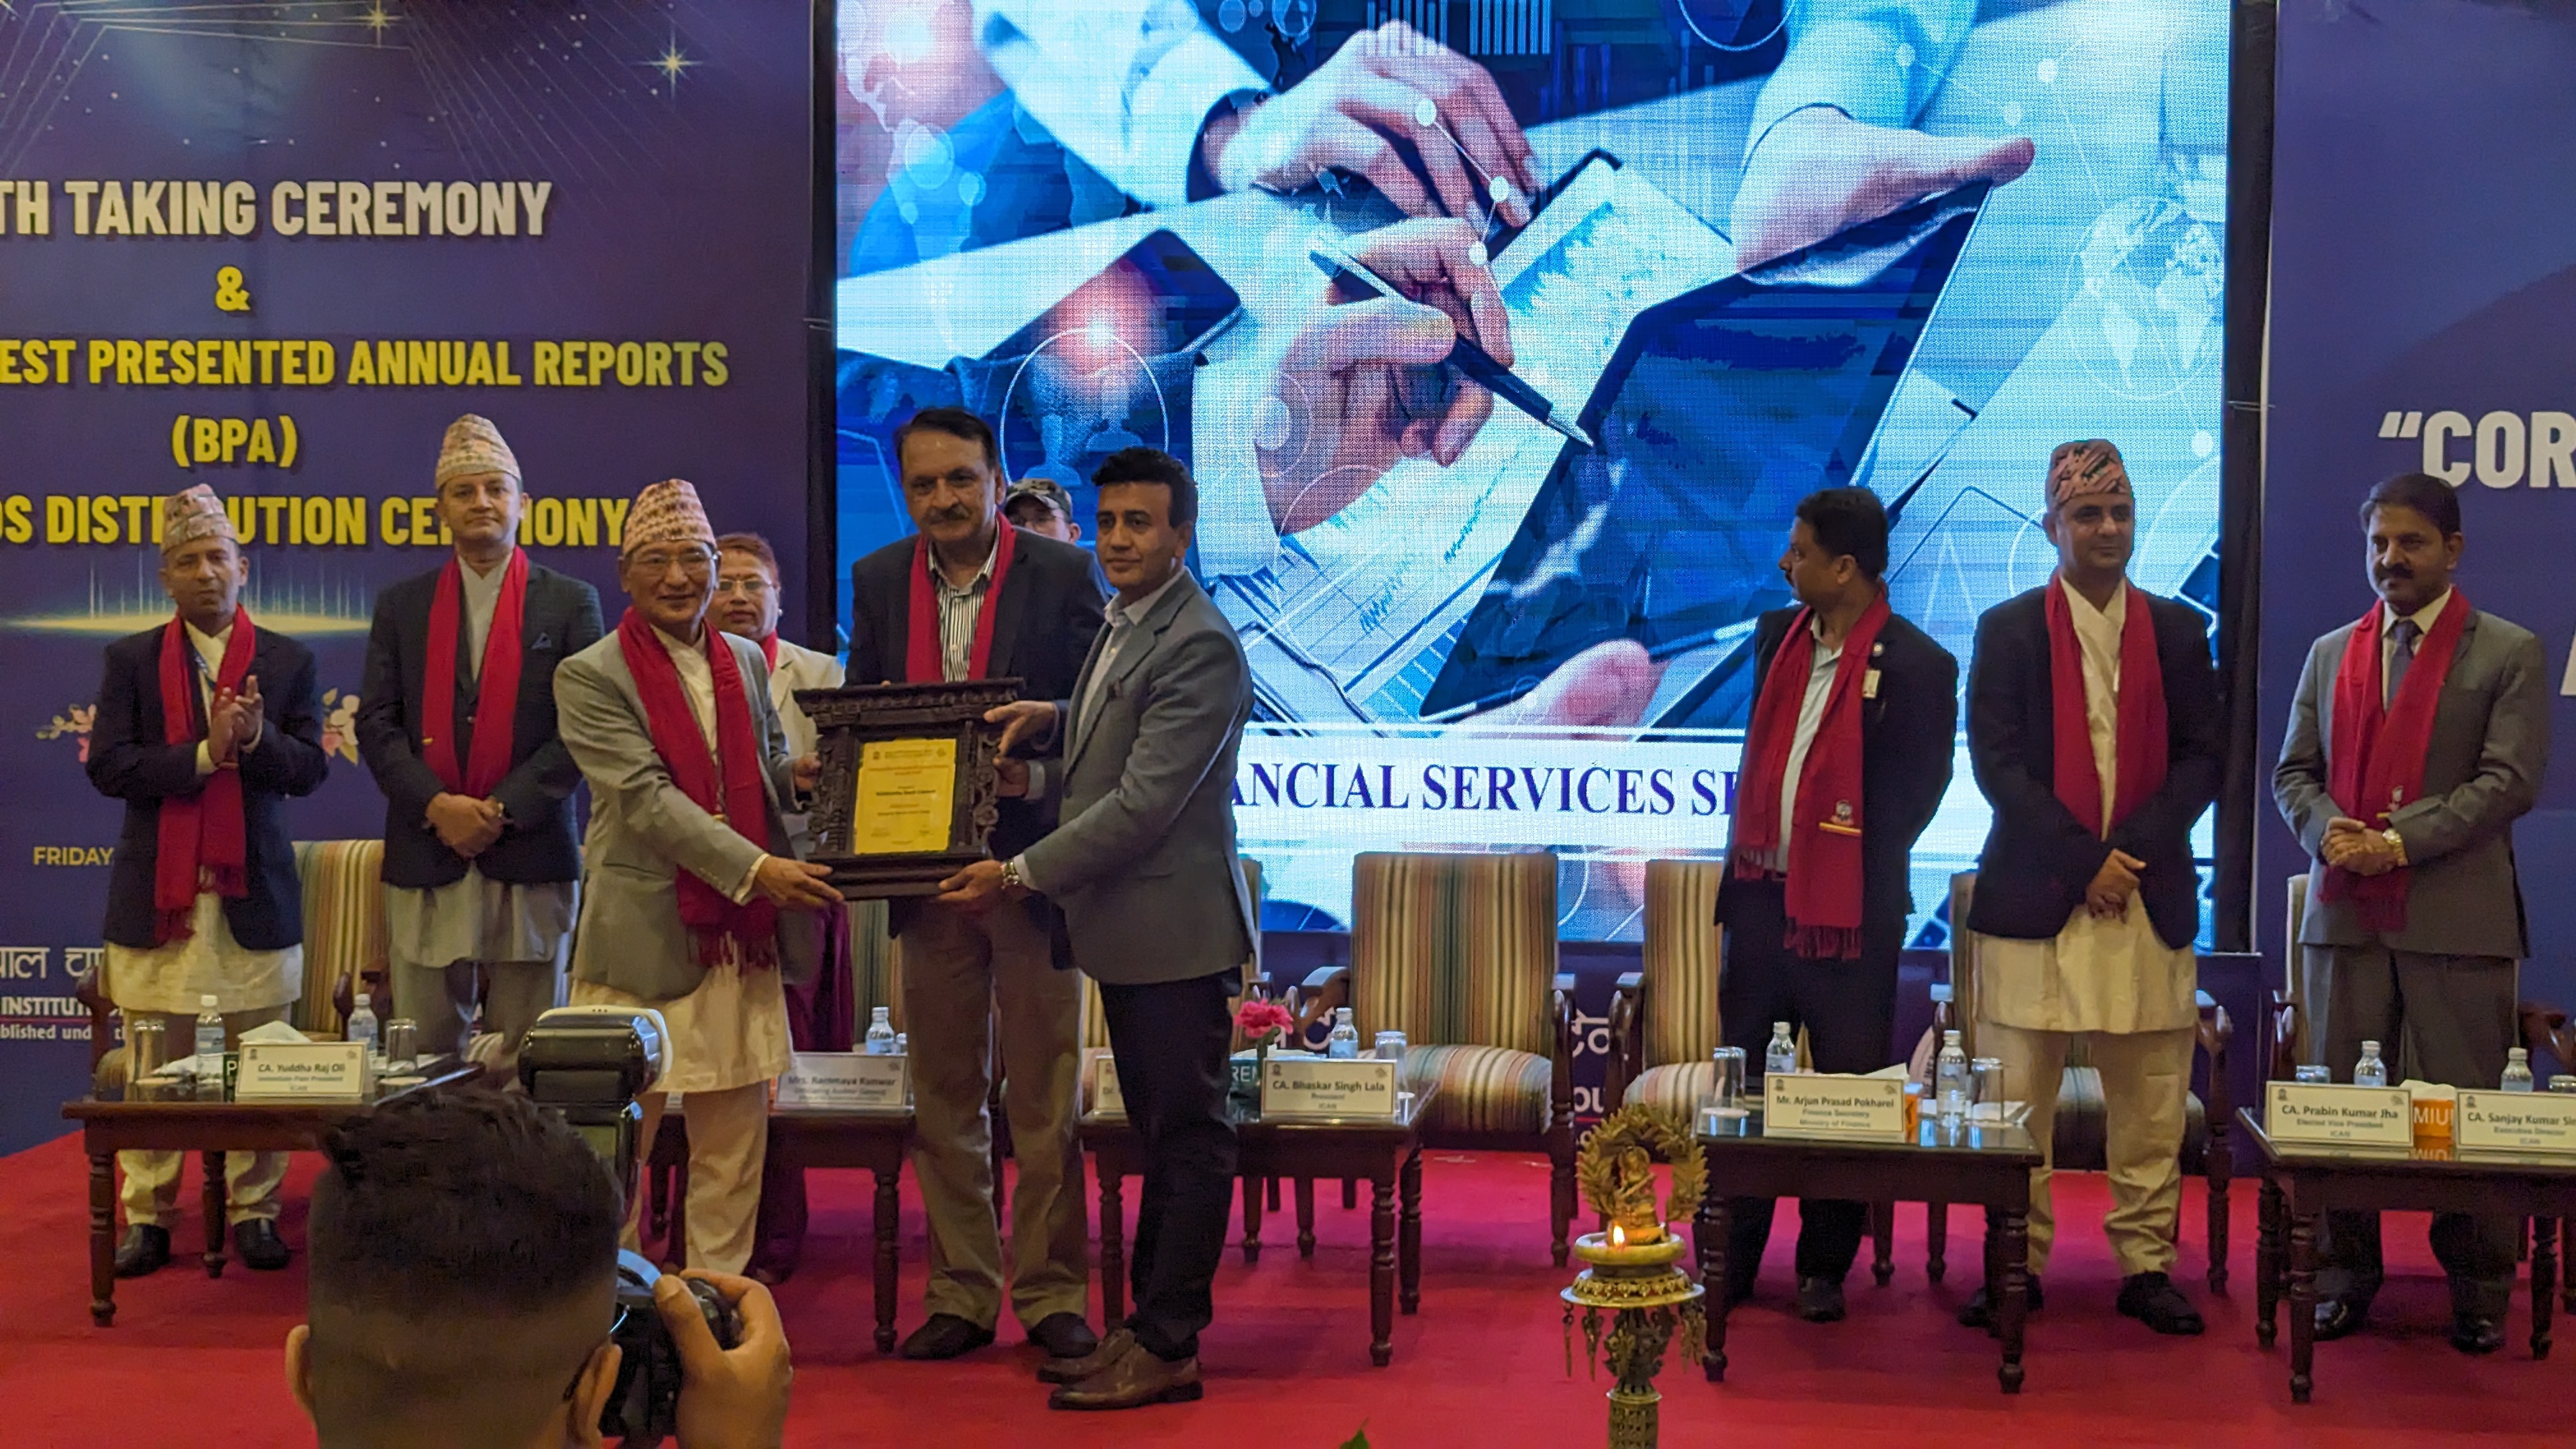 National Best Presented Annual Report Award 2022